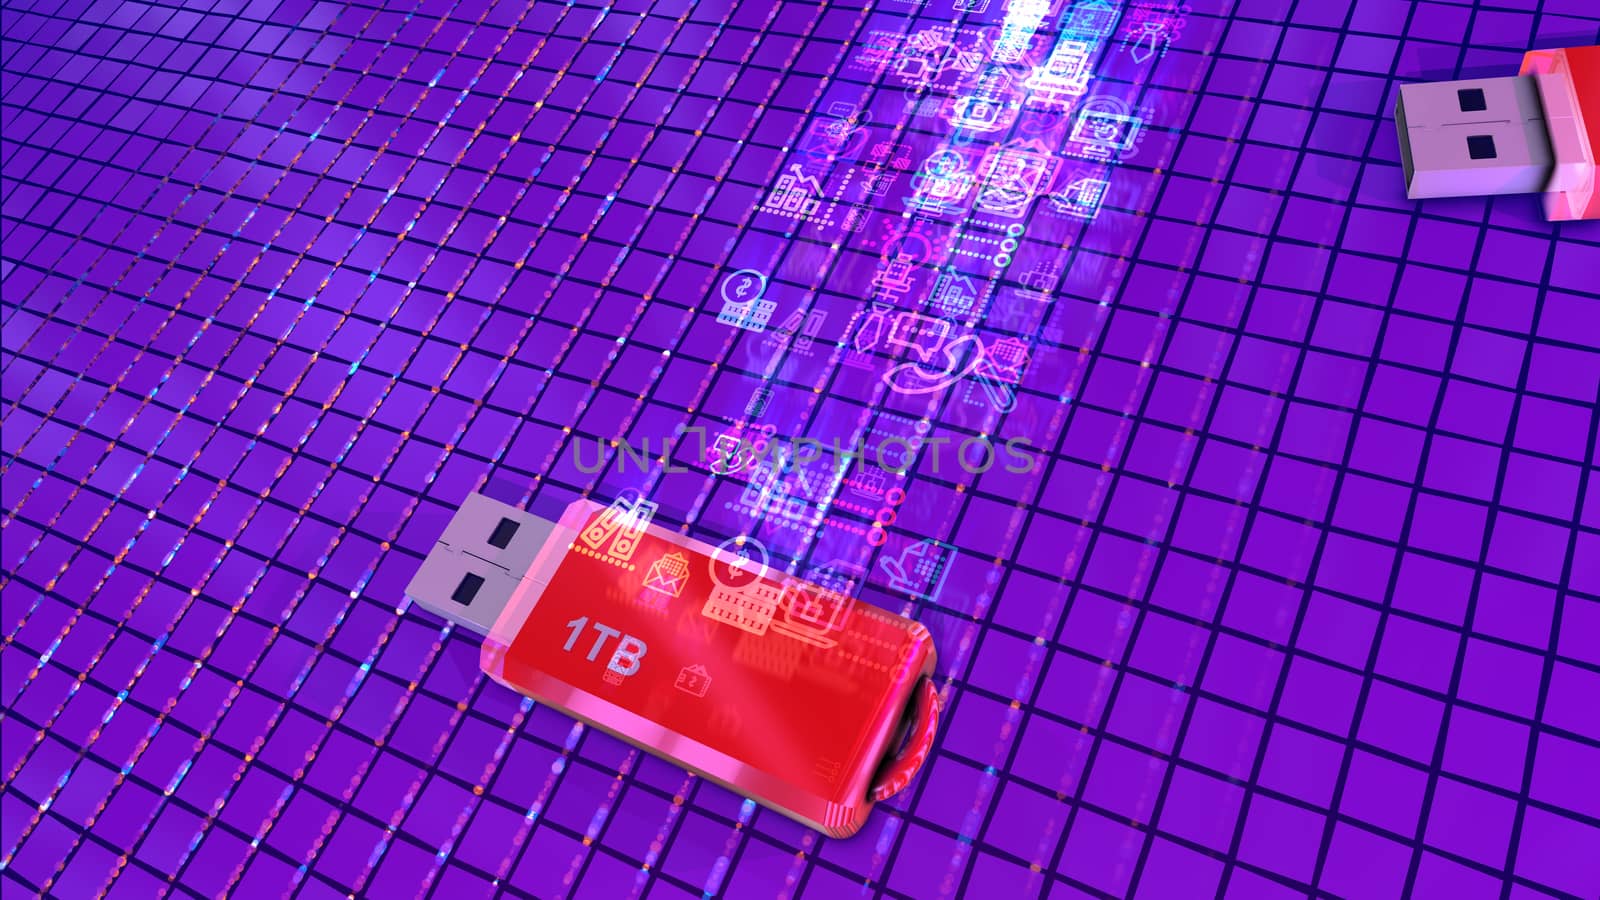 Futuristic 3d illustration of two red flash drives on a violet cyber platform placed aslant and covered with a net of conductors full of passing information